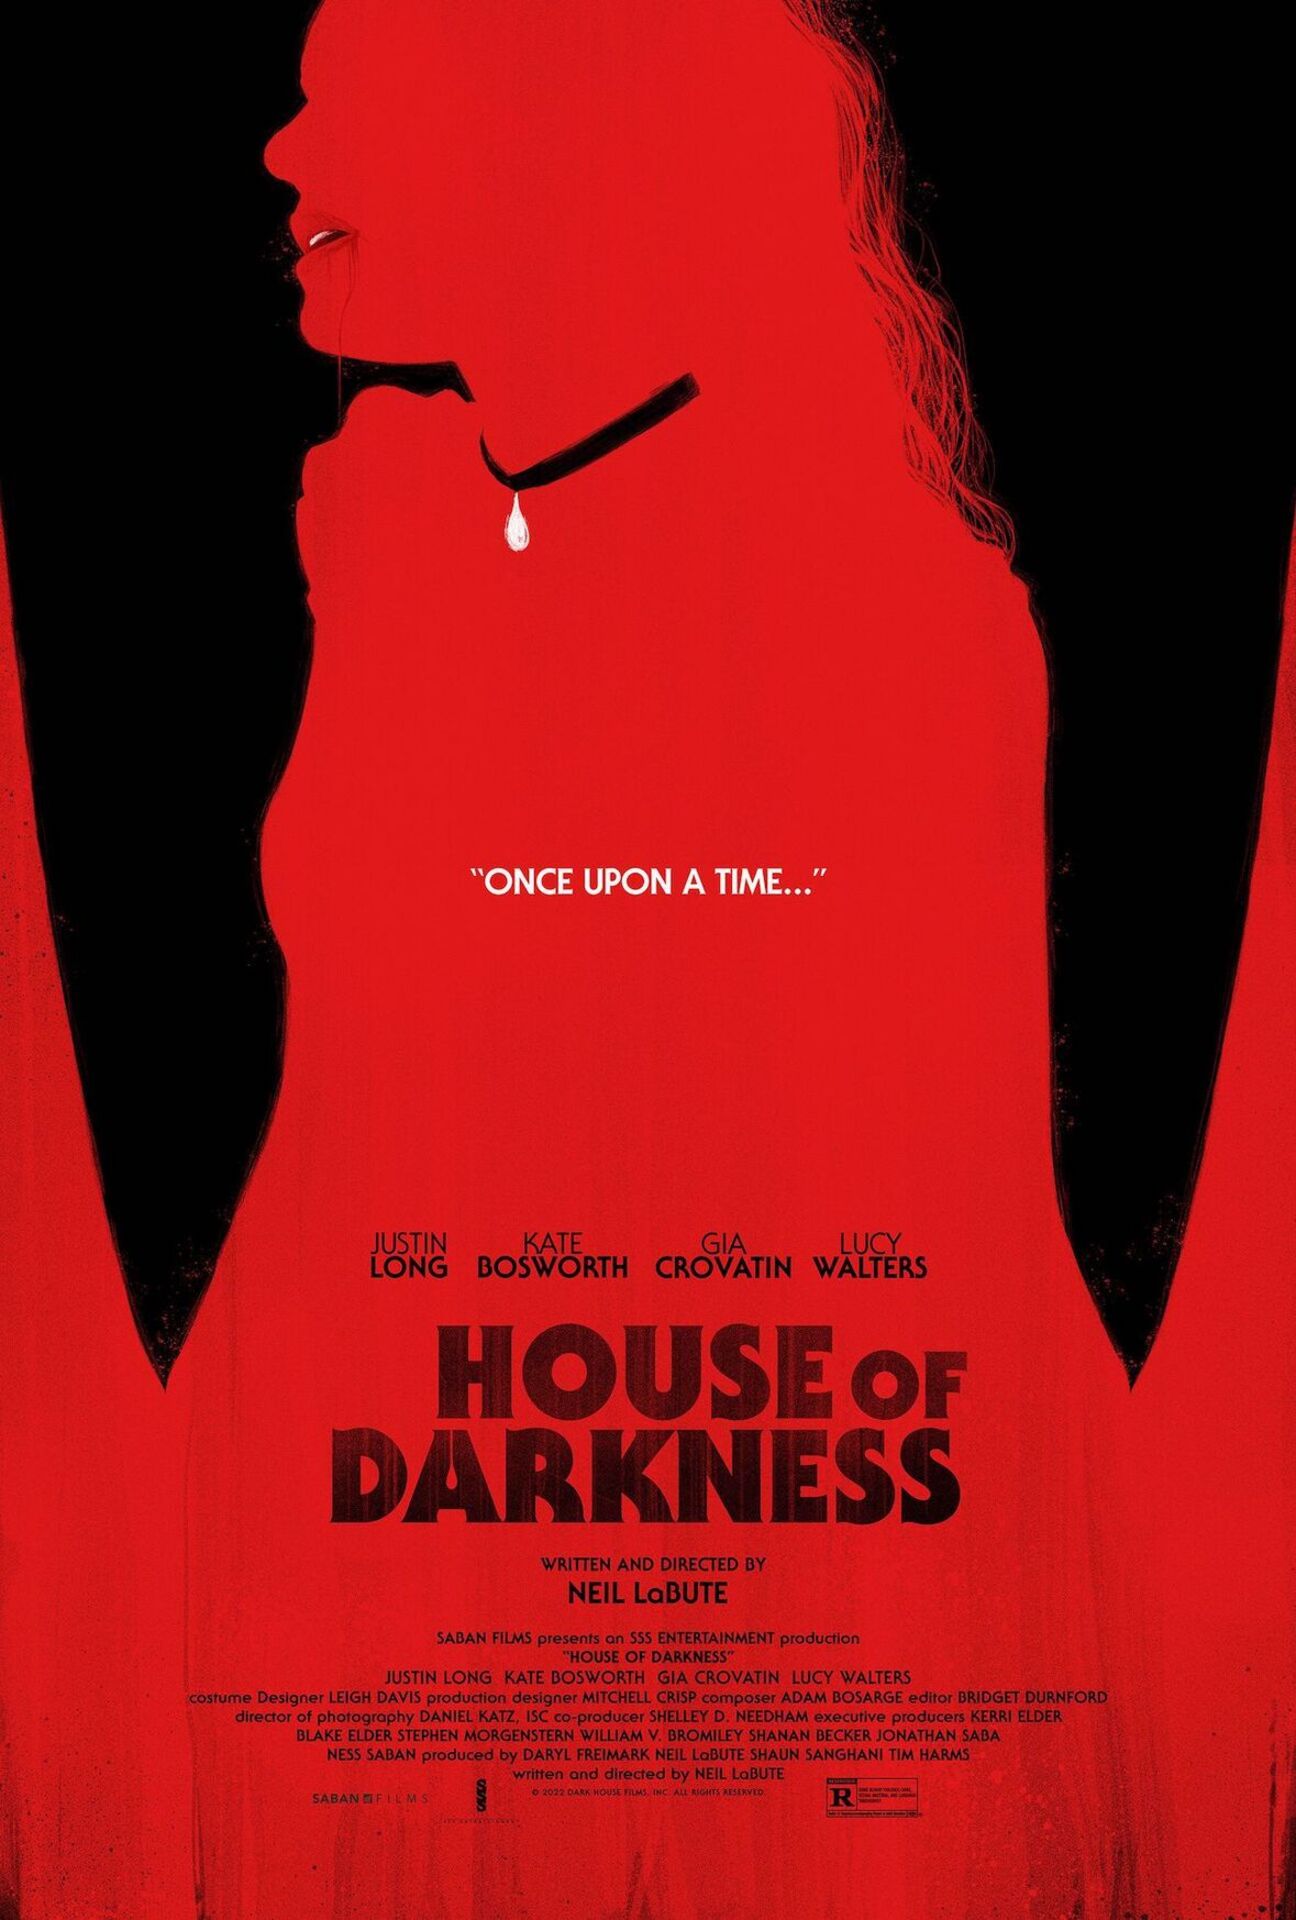 Theatrical poster for House Of Darkness, a Saban Films release. Image courtesy of Saban Films.